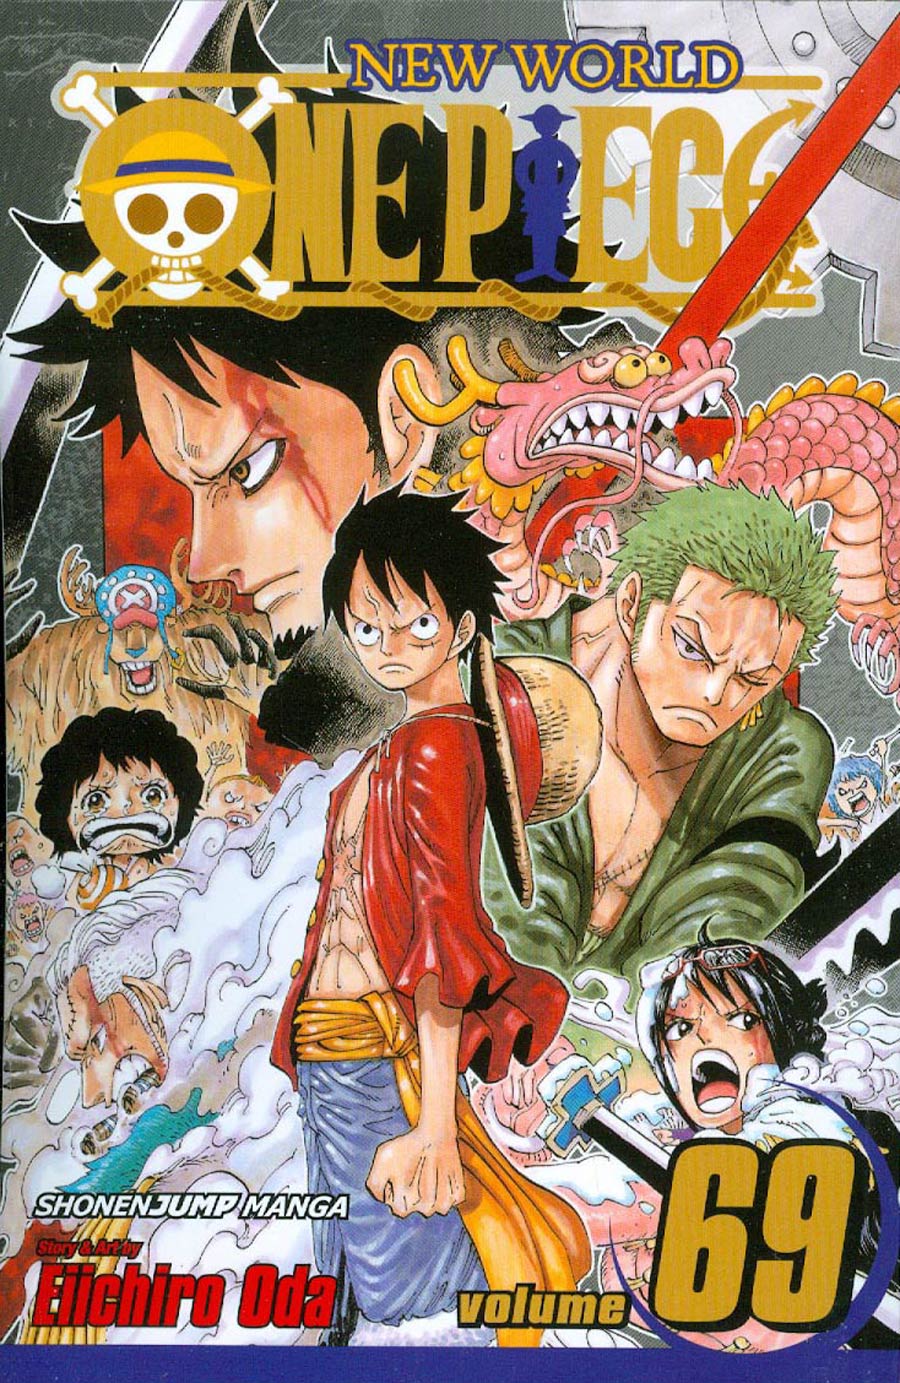 One Piece Vol 69 New World GN